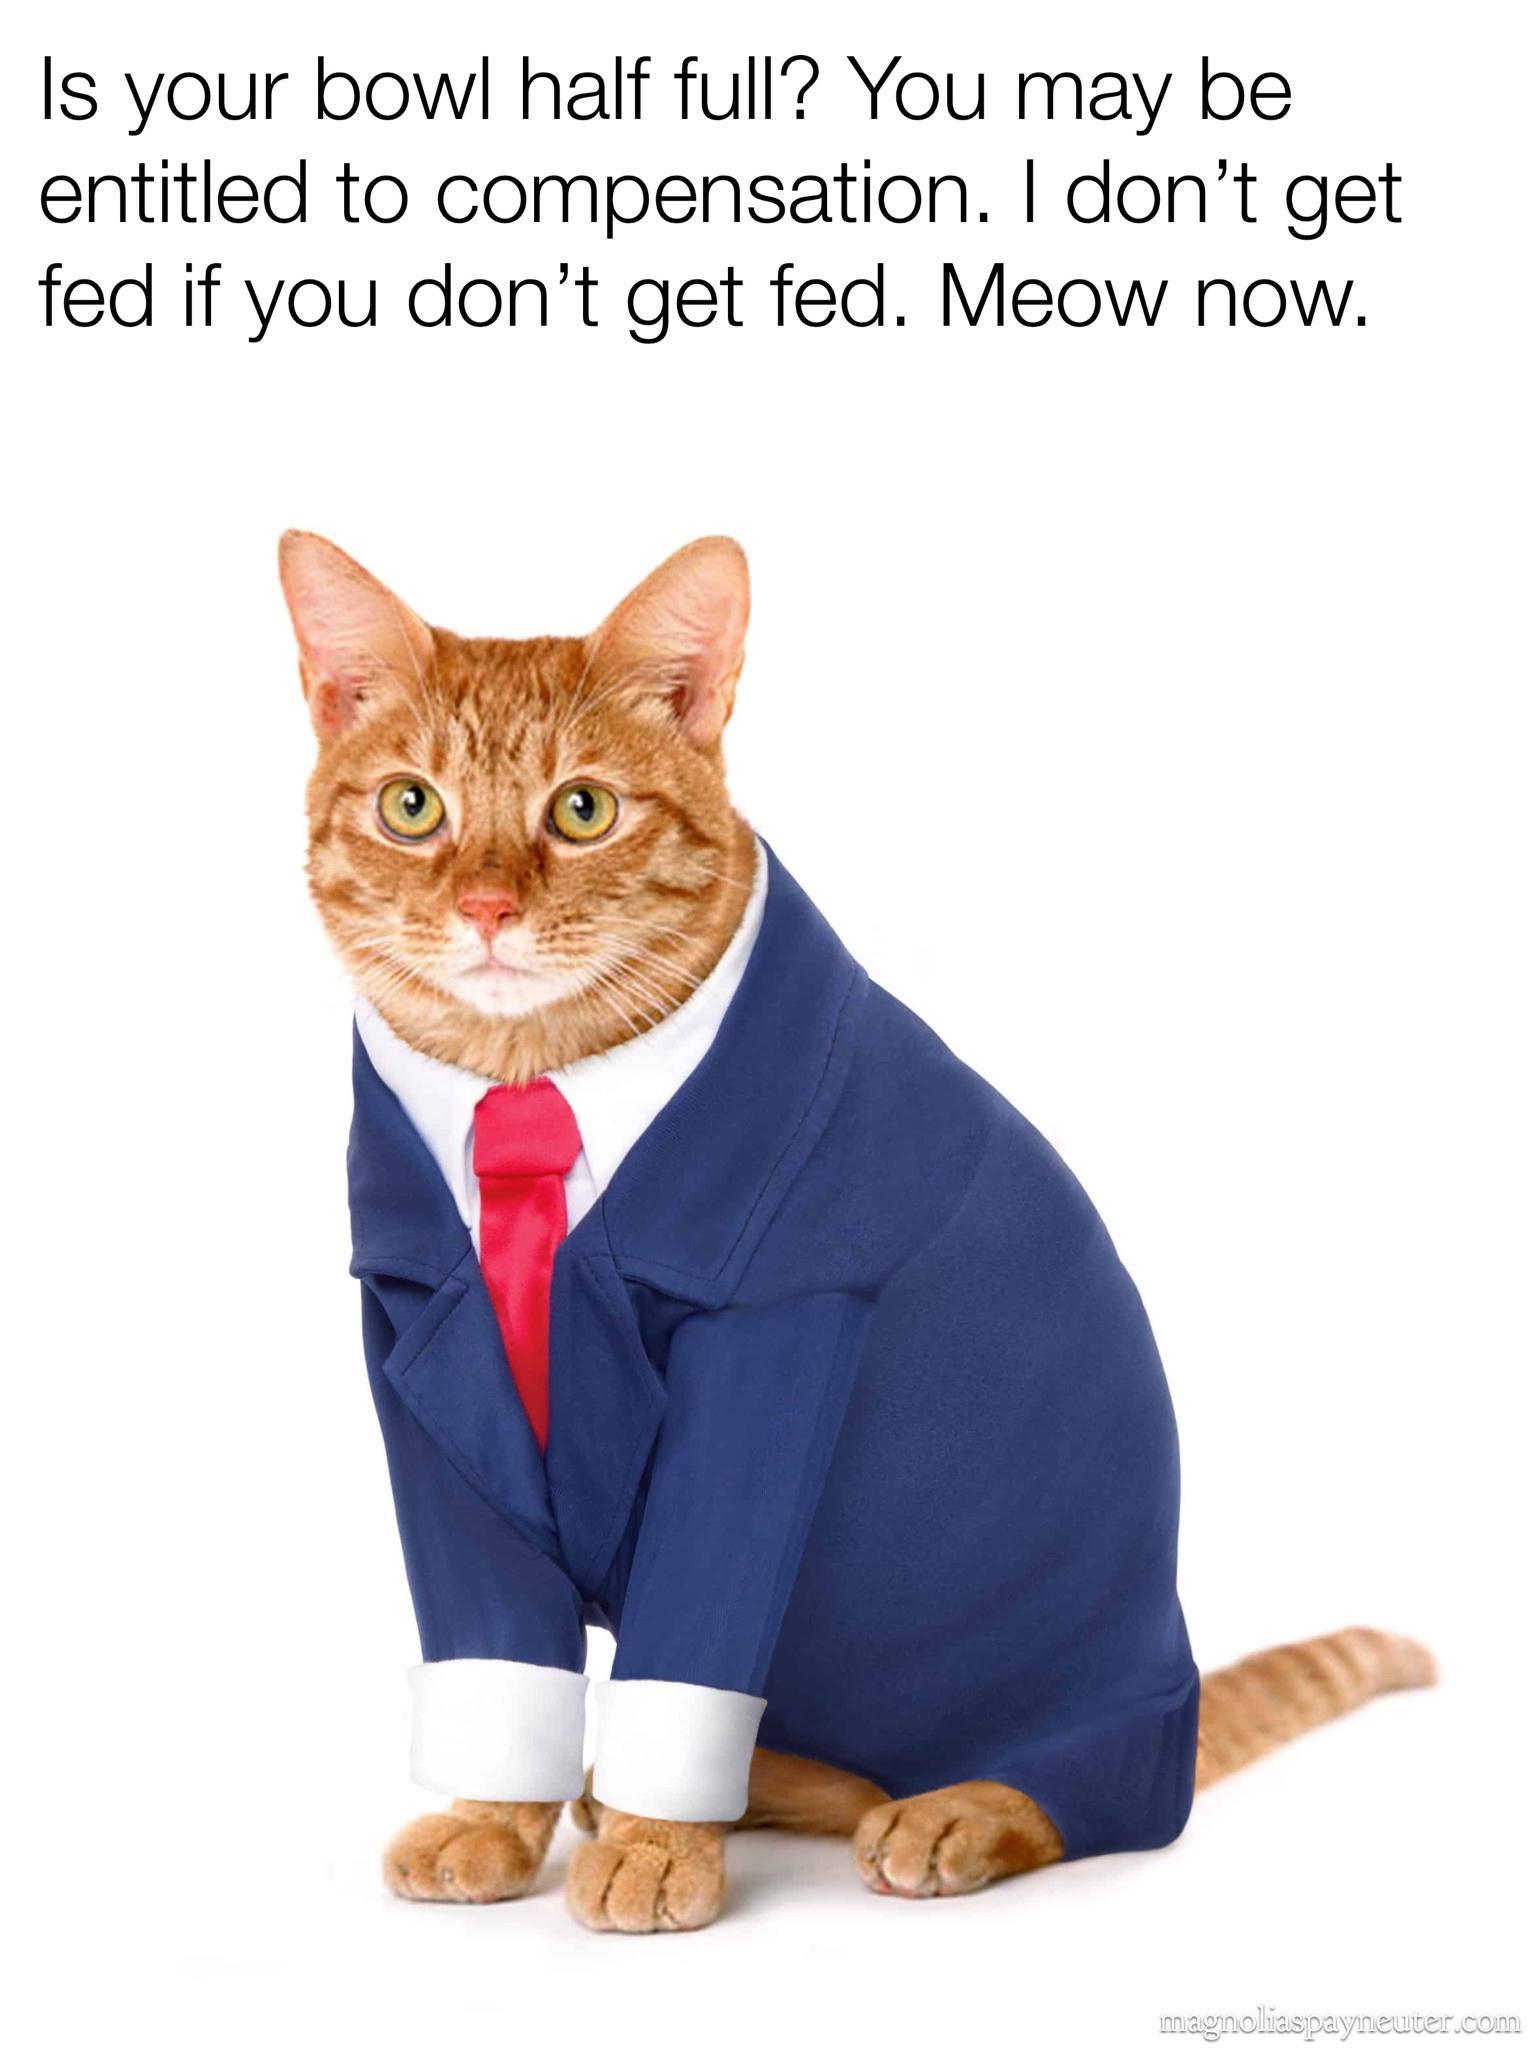 funny memes - hilarious memes - cat in a suit - Is your bowl half full? You may be entitled to compensation. I don't get fed if you don't get fed. Meow now. magnoliaspayneuber.com